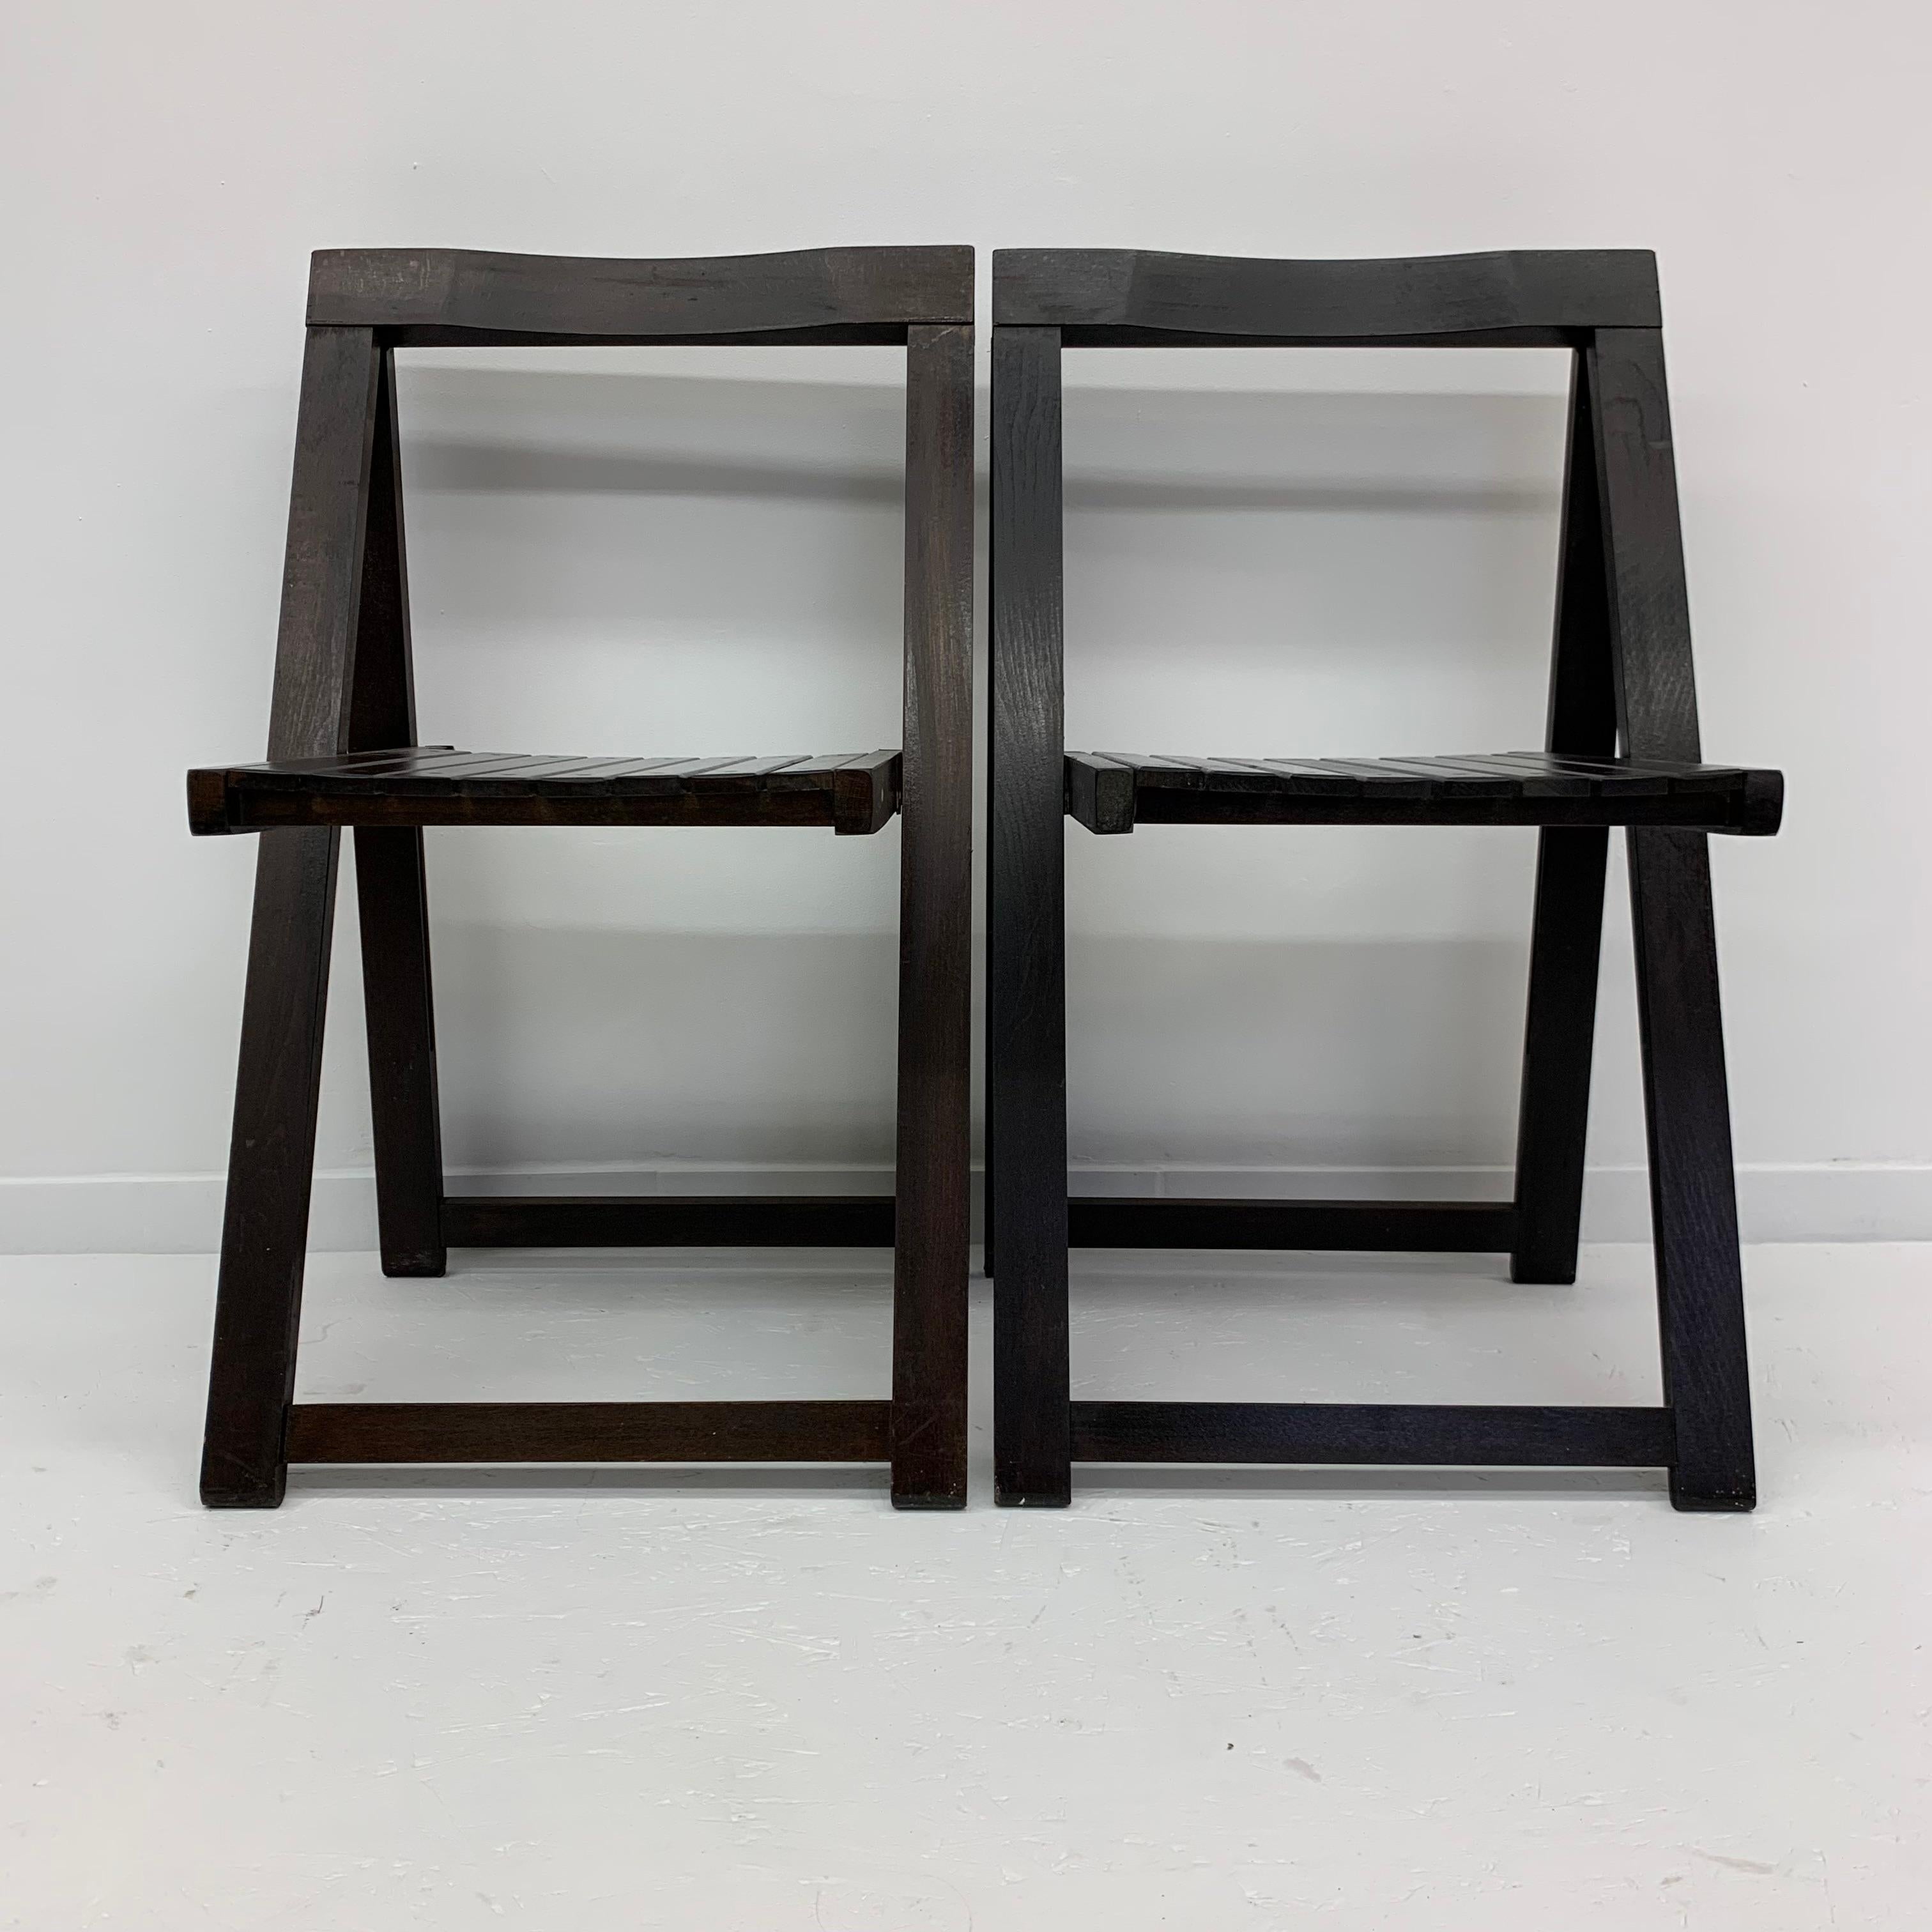 Mid-20th Century Set of 2 Aldo Jacober for Alberto Bazzani wooden folding chairs, 1960’s For Sale